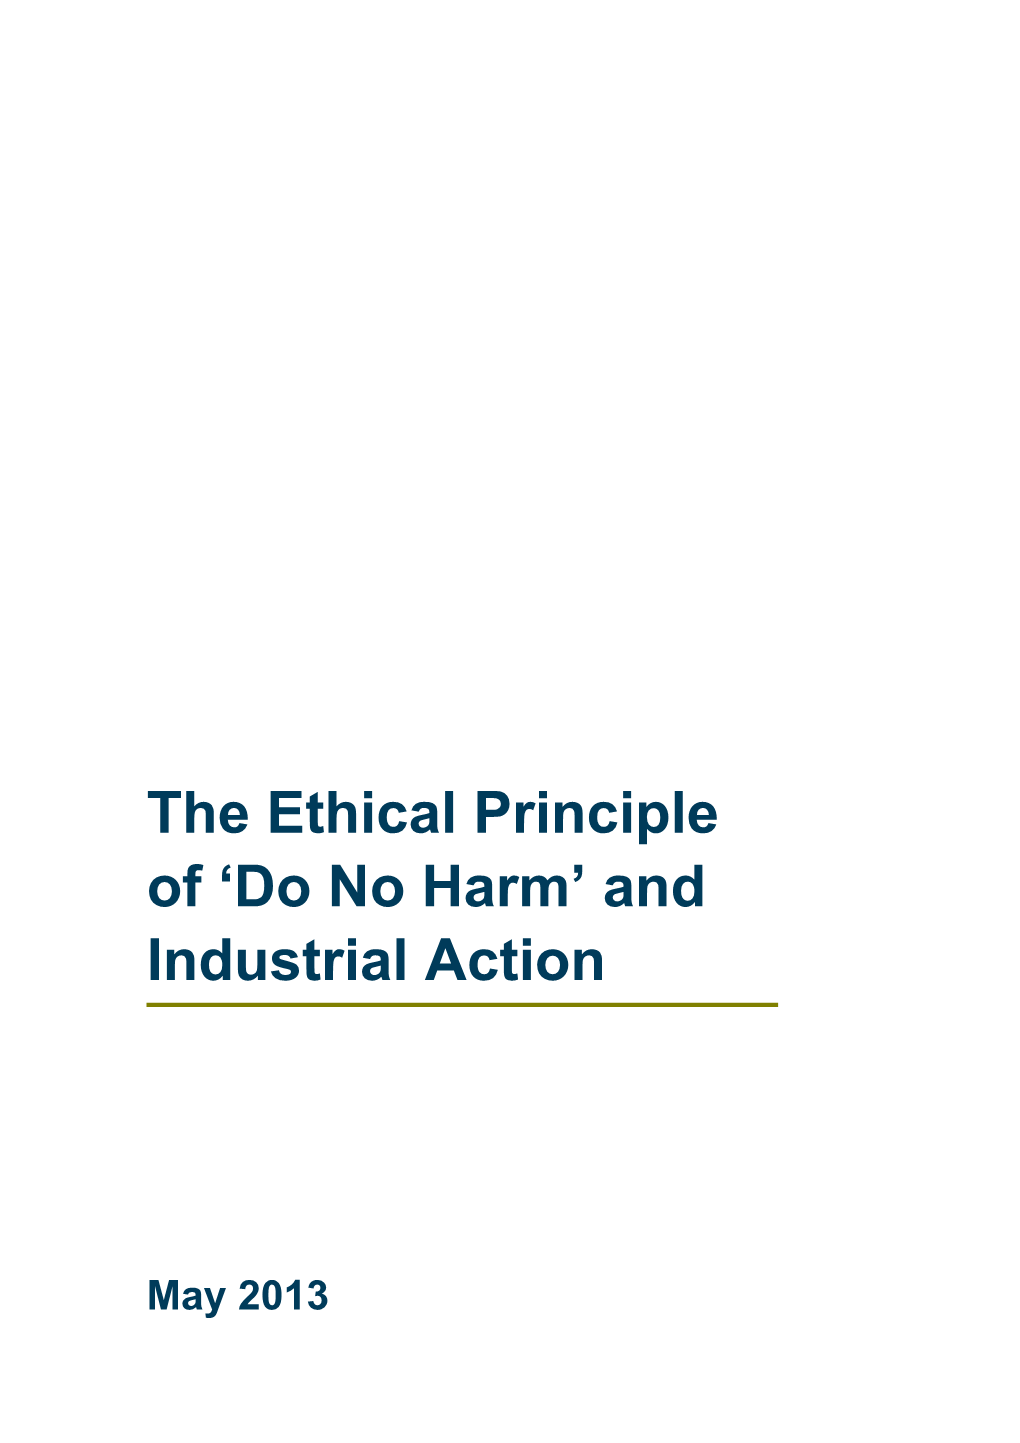 The Ethical Principle of Do No Harm and Industrial Action